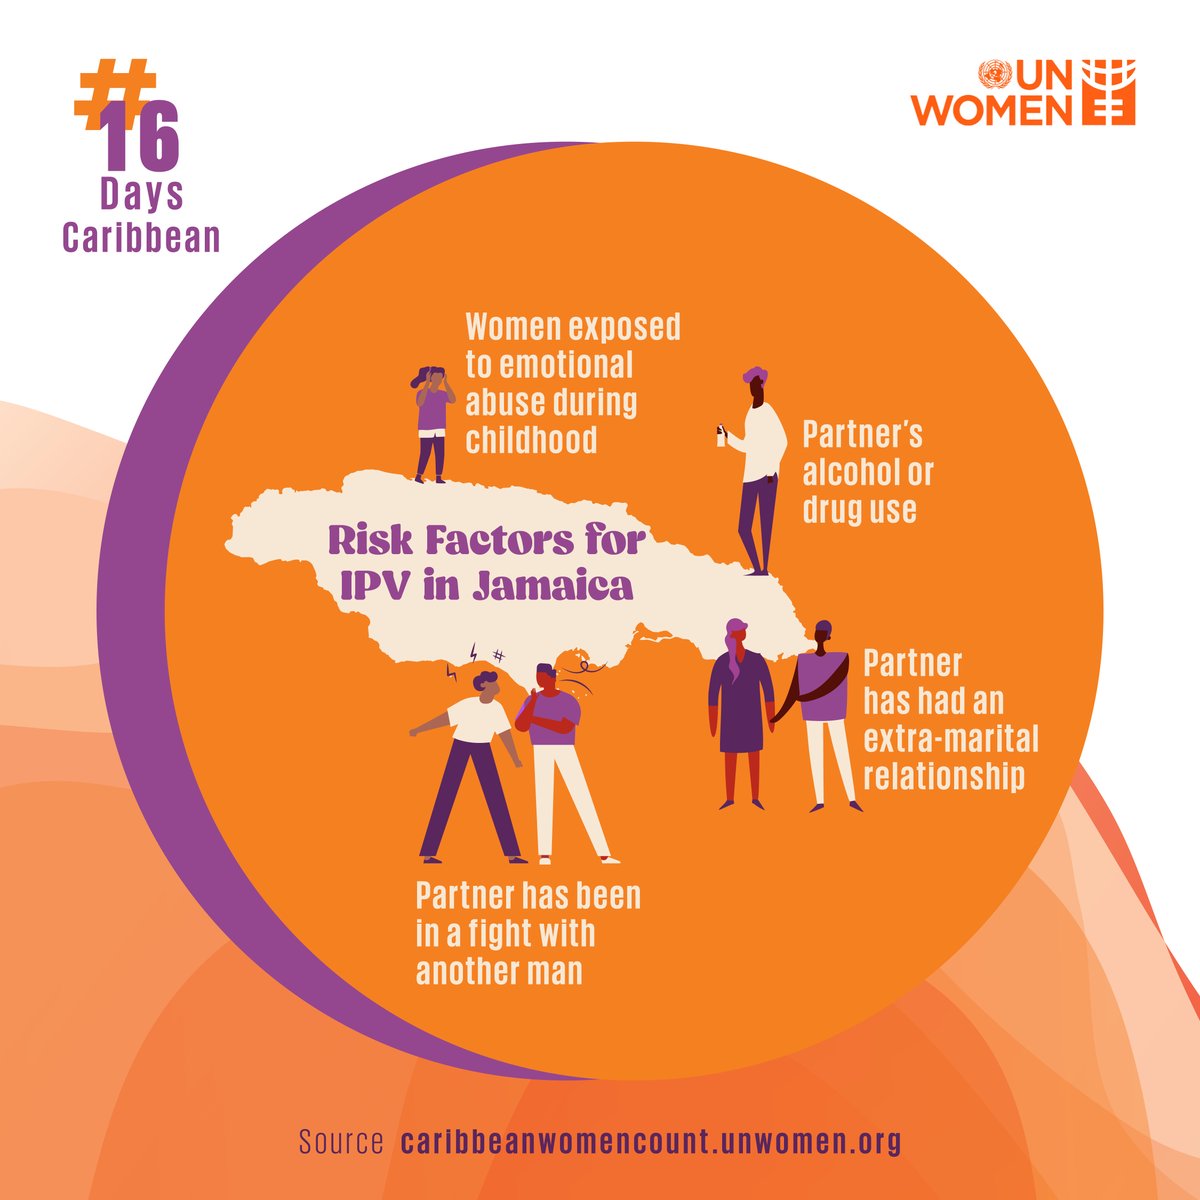 “Him a just a hothead!” 

Frequent quarreling is the highest risk factor for women in Jamaica who have experienced physical and/or sexual intimate partner violence (IPV) in their lifetime. Learn more IPV data here: caribbeanwomencount.unwomen.org

#LetsTalkData